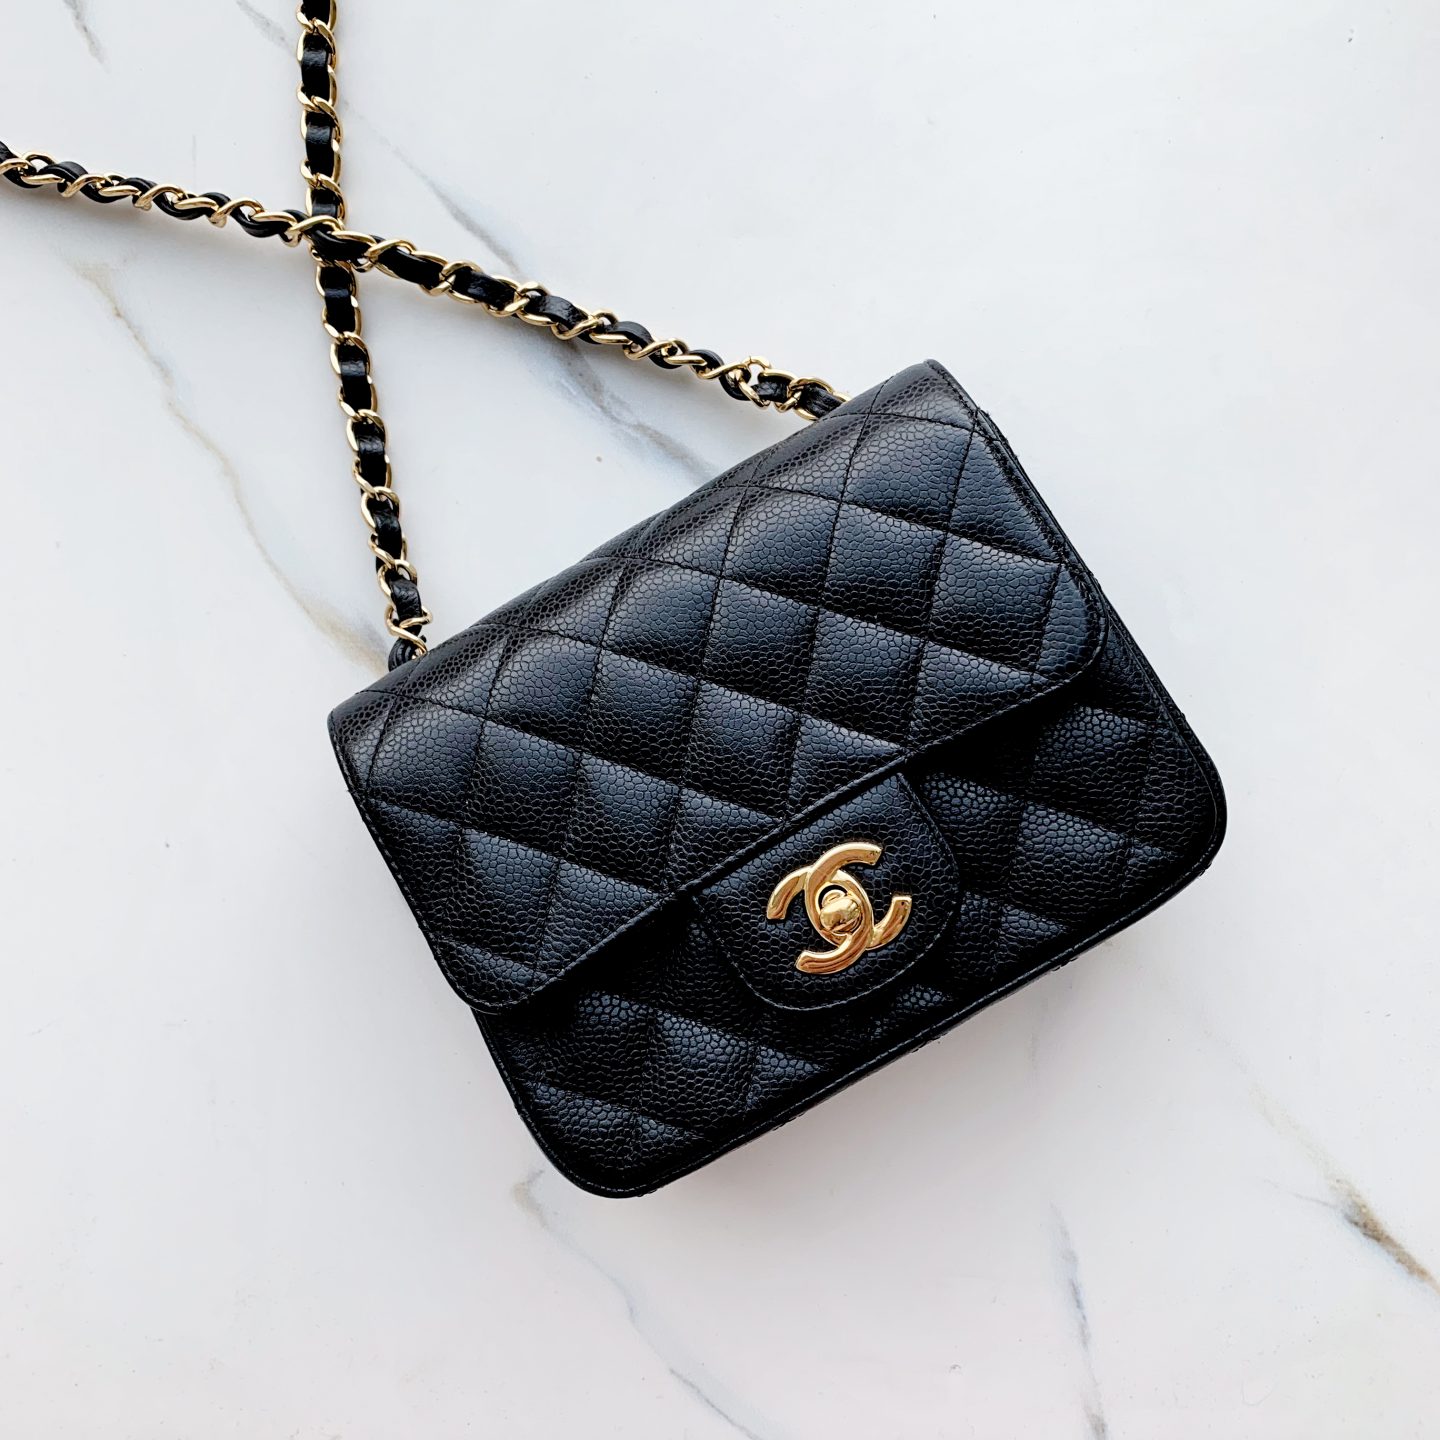 Chanel Handbags at Discount Prices  LuxeDH